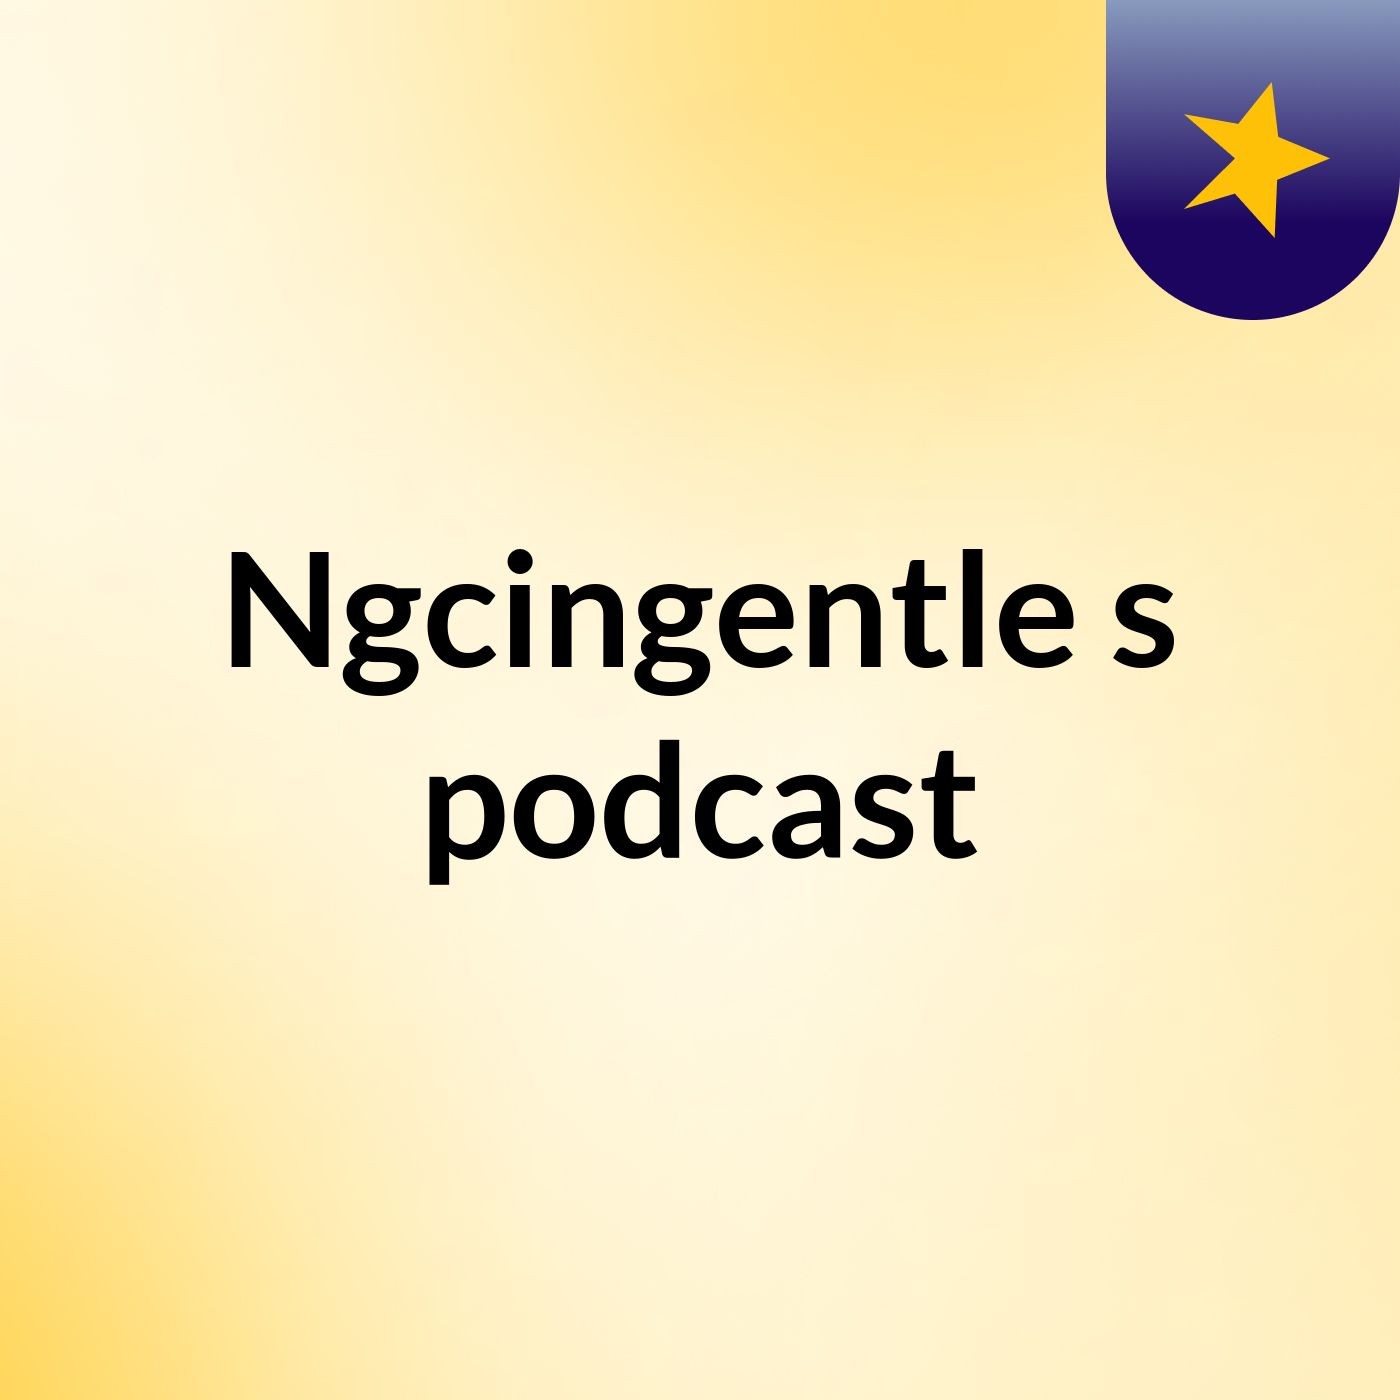 Ngcingentle's podcast